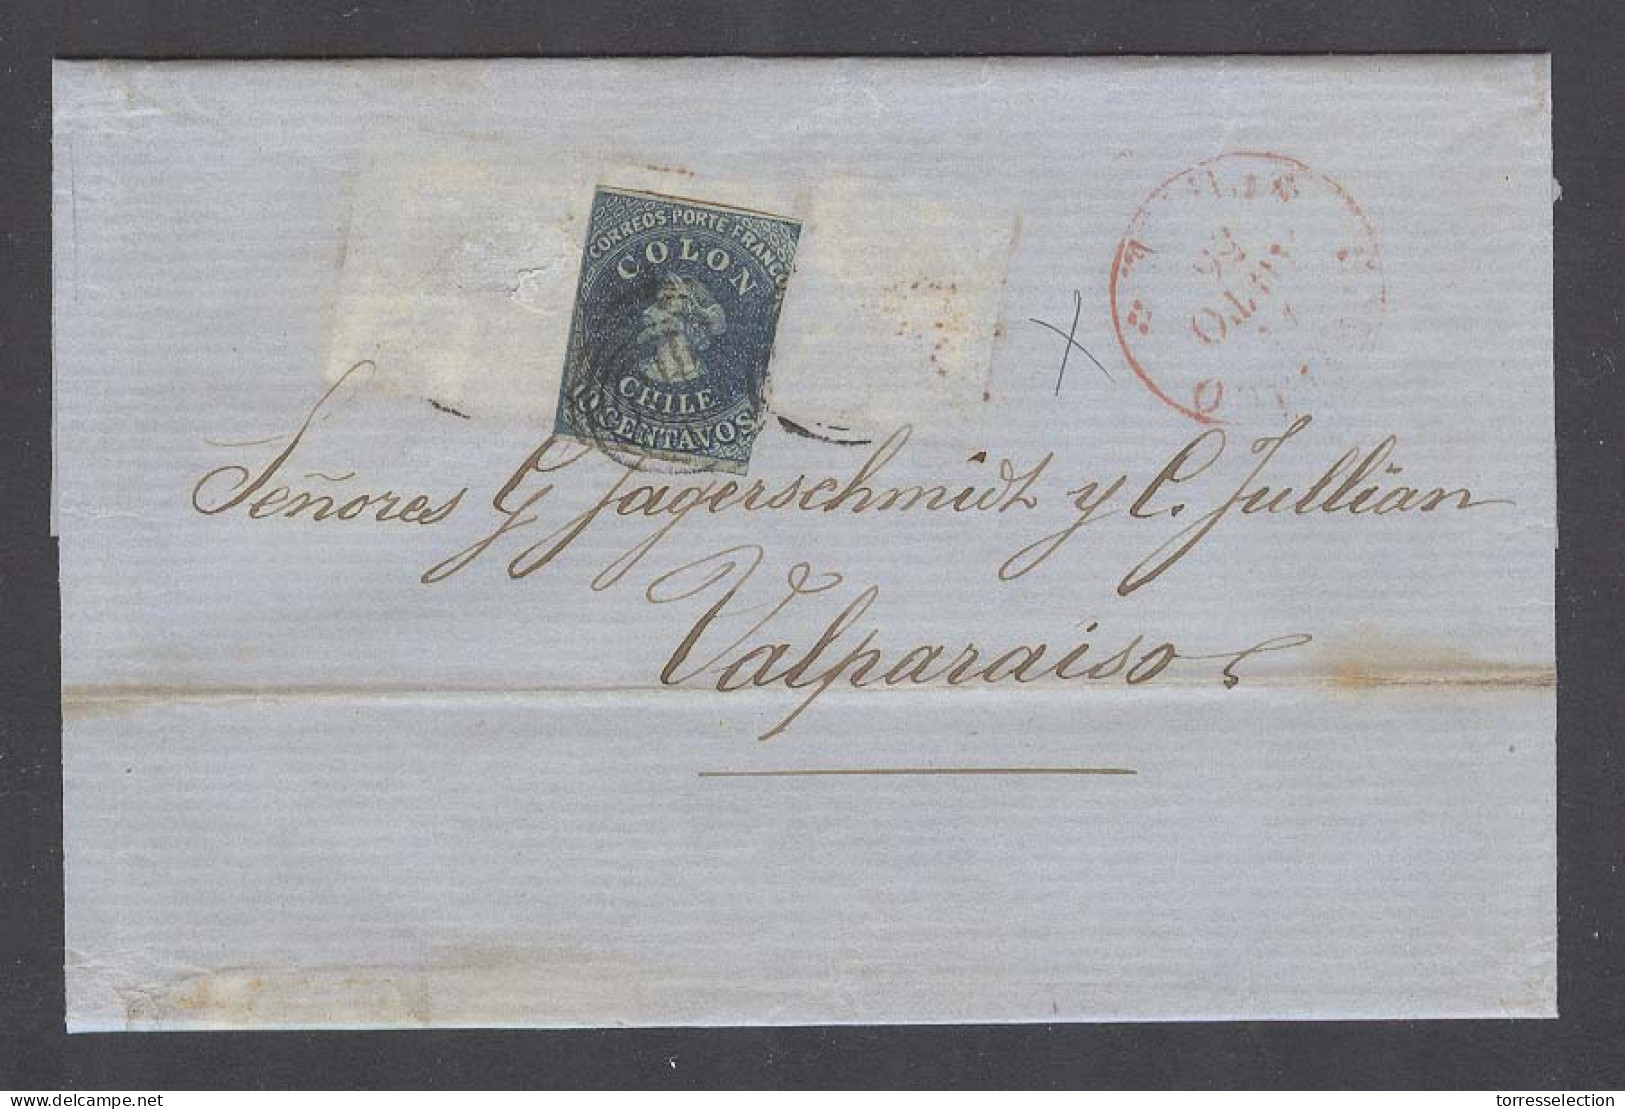 CHILE. 1856 (11 Ago). Santiago - Val- EL Fkd 10c Tragedy. Opportunity From The Jaggerschmidt Original Correspondence. - Chile